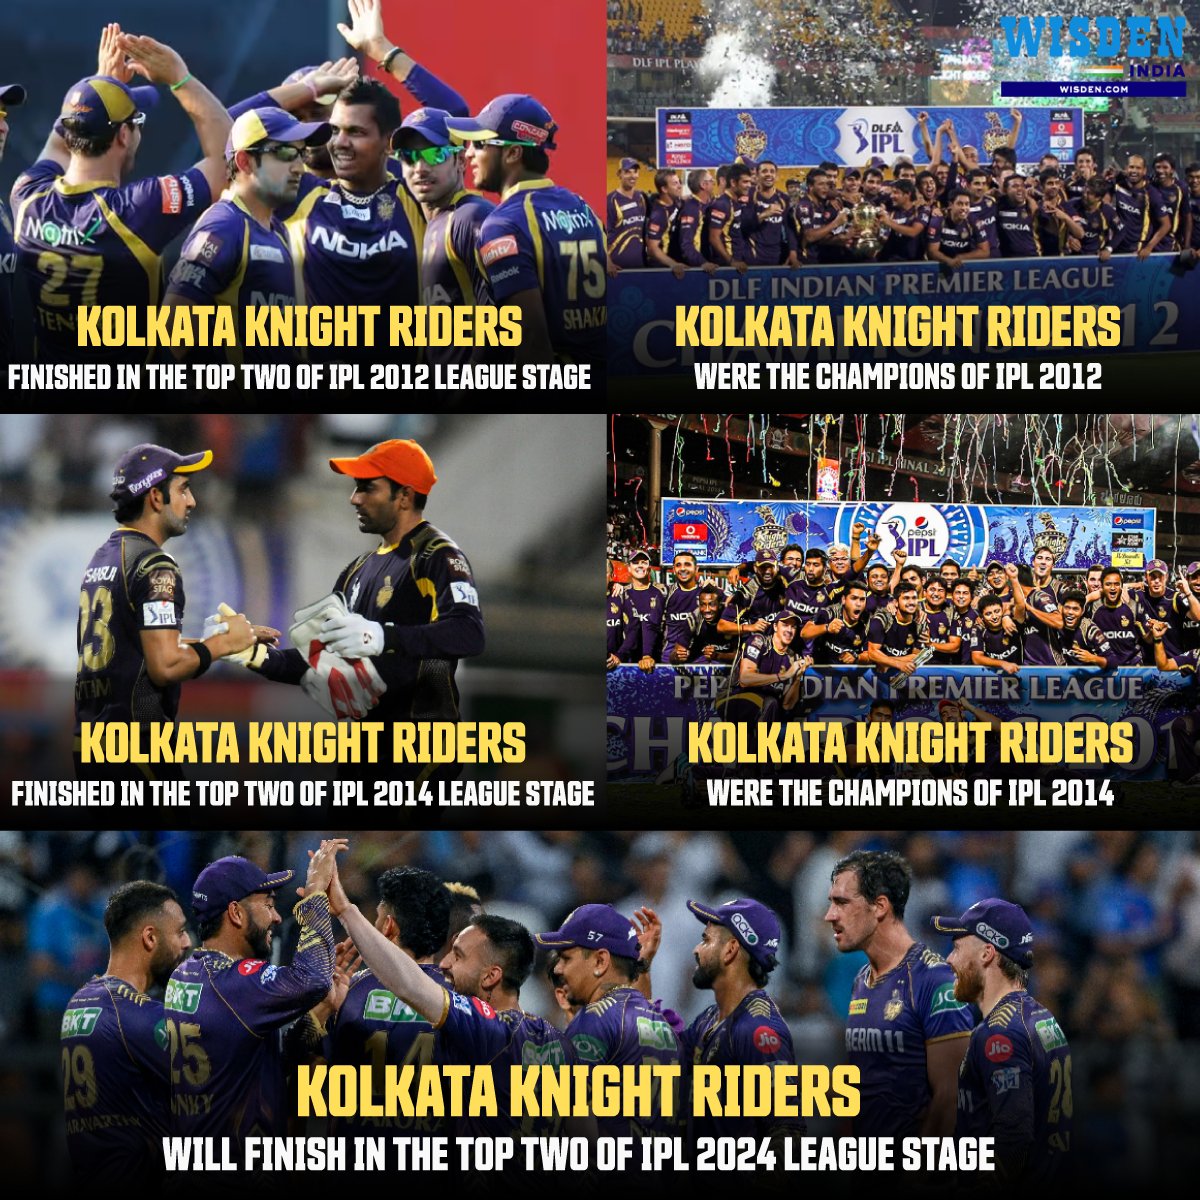 Kolkata Knight Riders finished in the top two in 2012 and 2014 and both times they won the title 🔥

KR fans, is the third title on the way? 🤔

#KolkataKnightRiders #ShreyasIyer #GautamGambhir #IPL2024 #Cricket #IPLPlayoffs